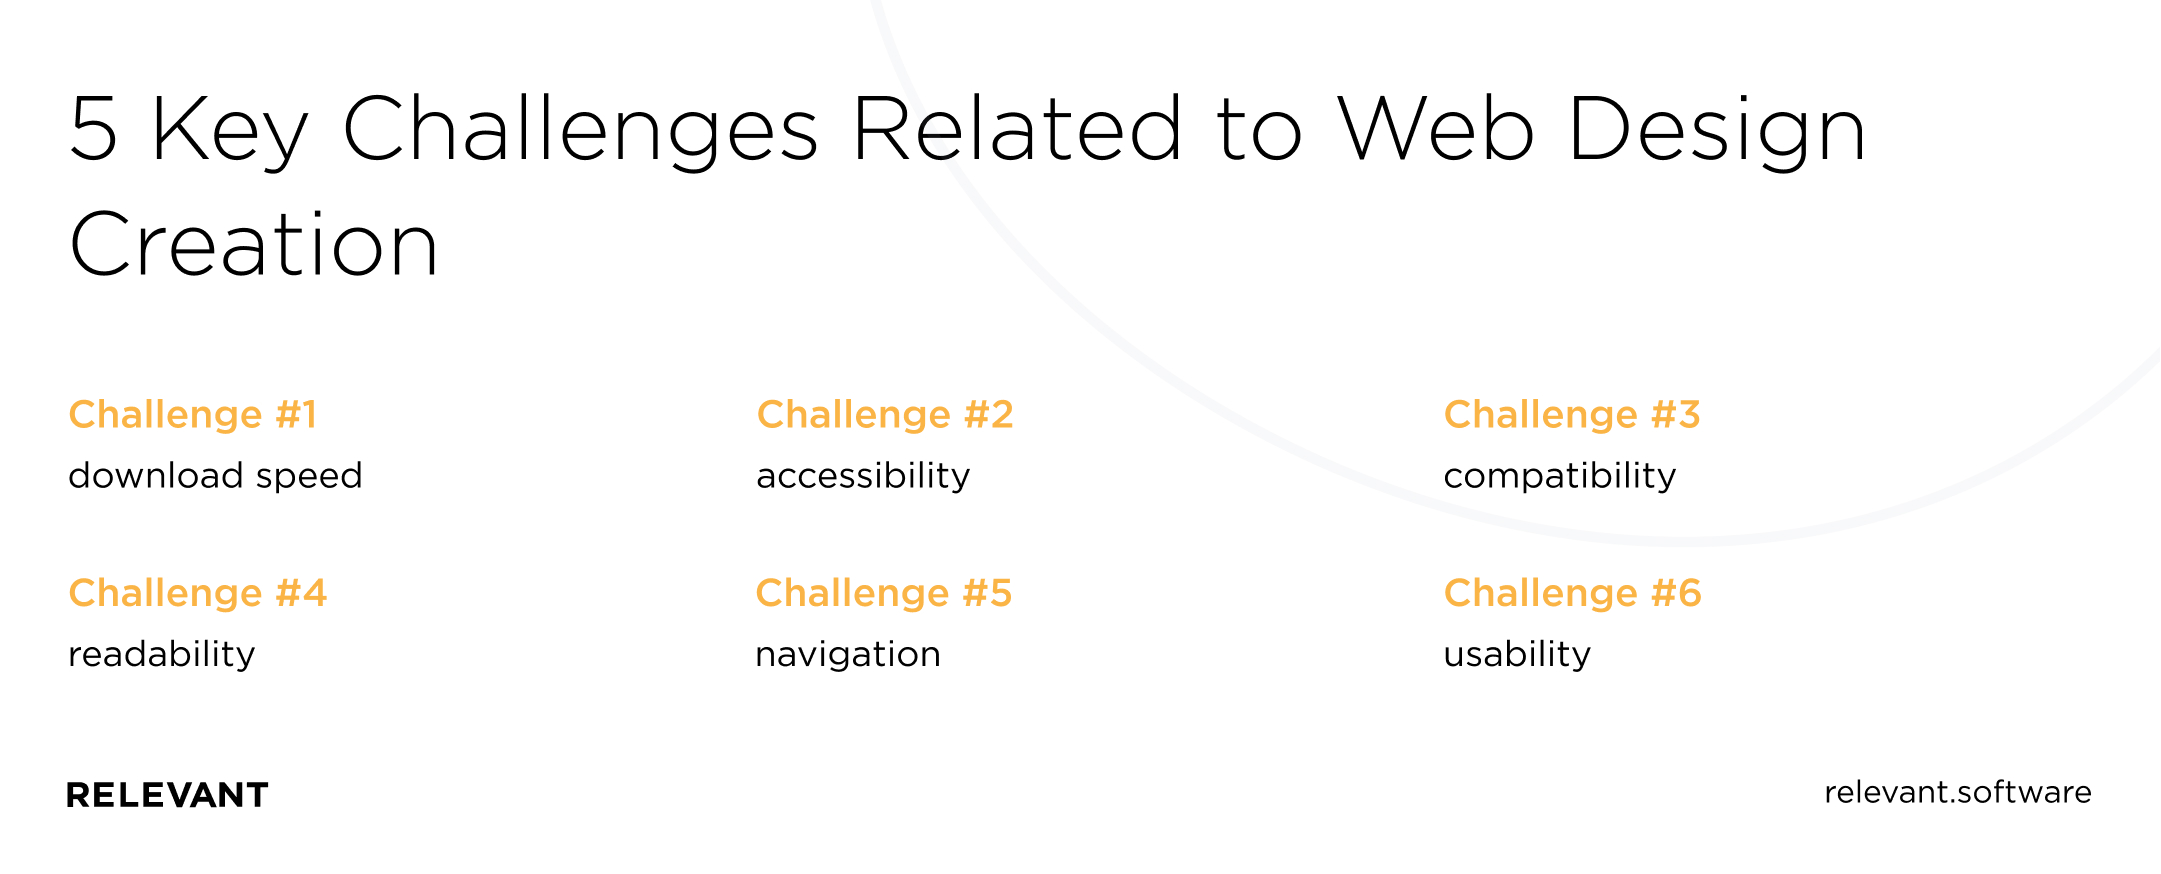 5 Key Challenges Related to Web Design Creation